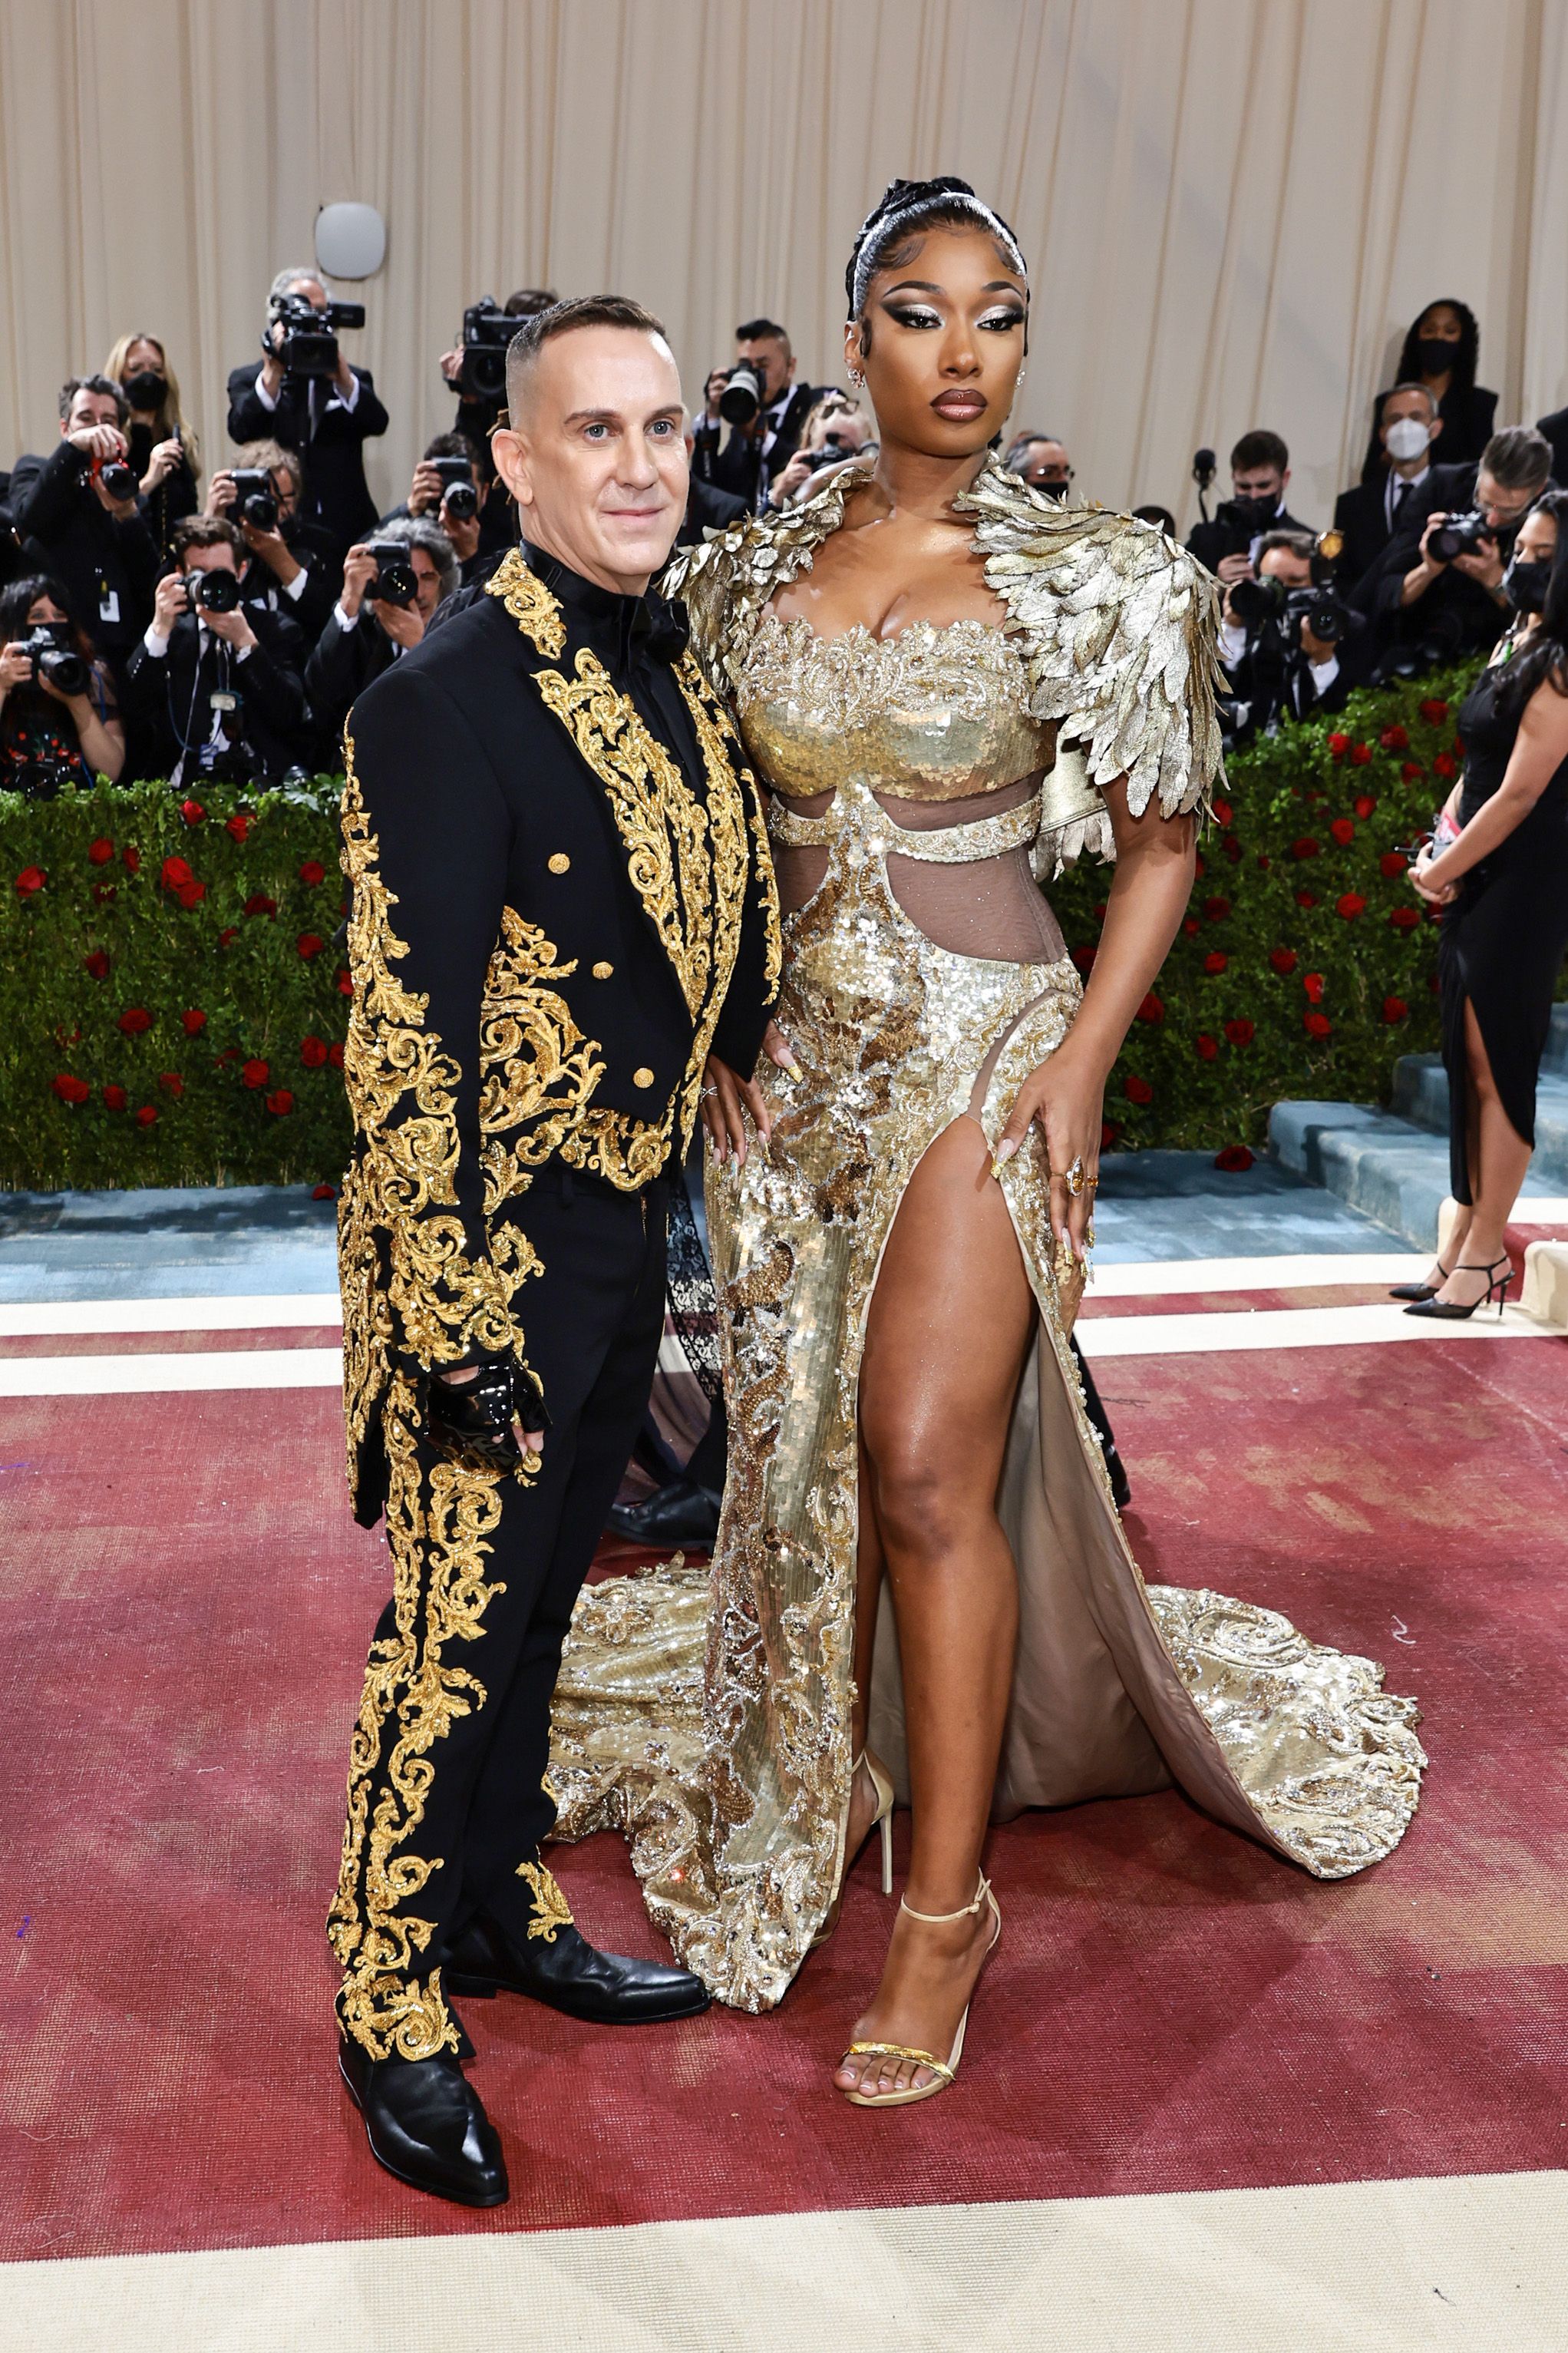 Met Gala 2022: Celebrities Who Shined In Gilded Glamour –